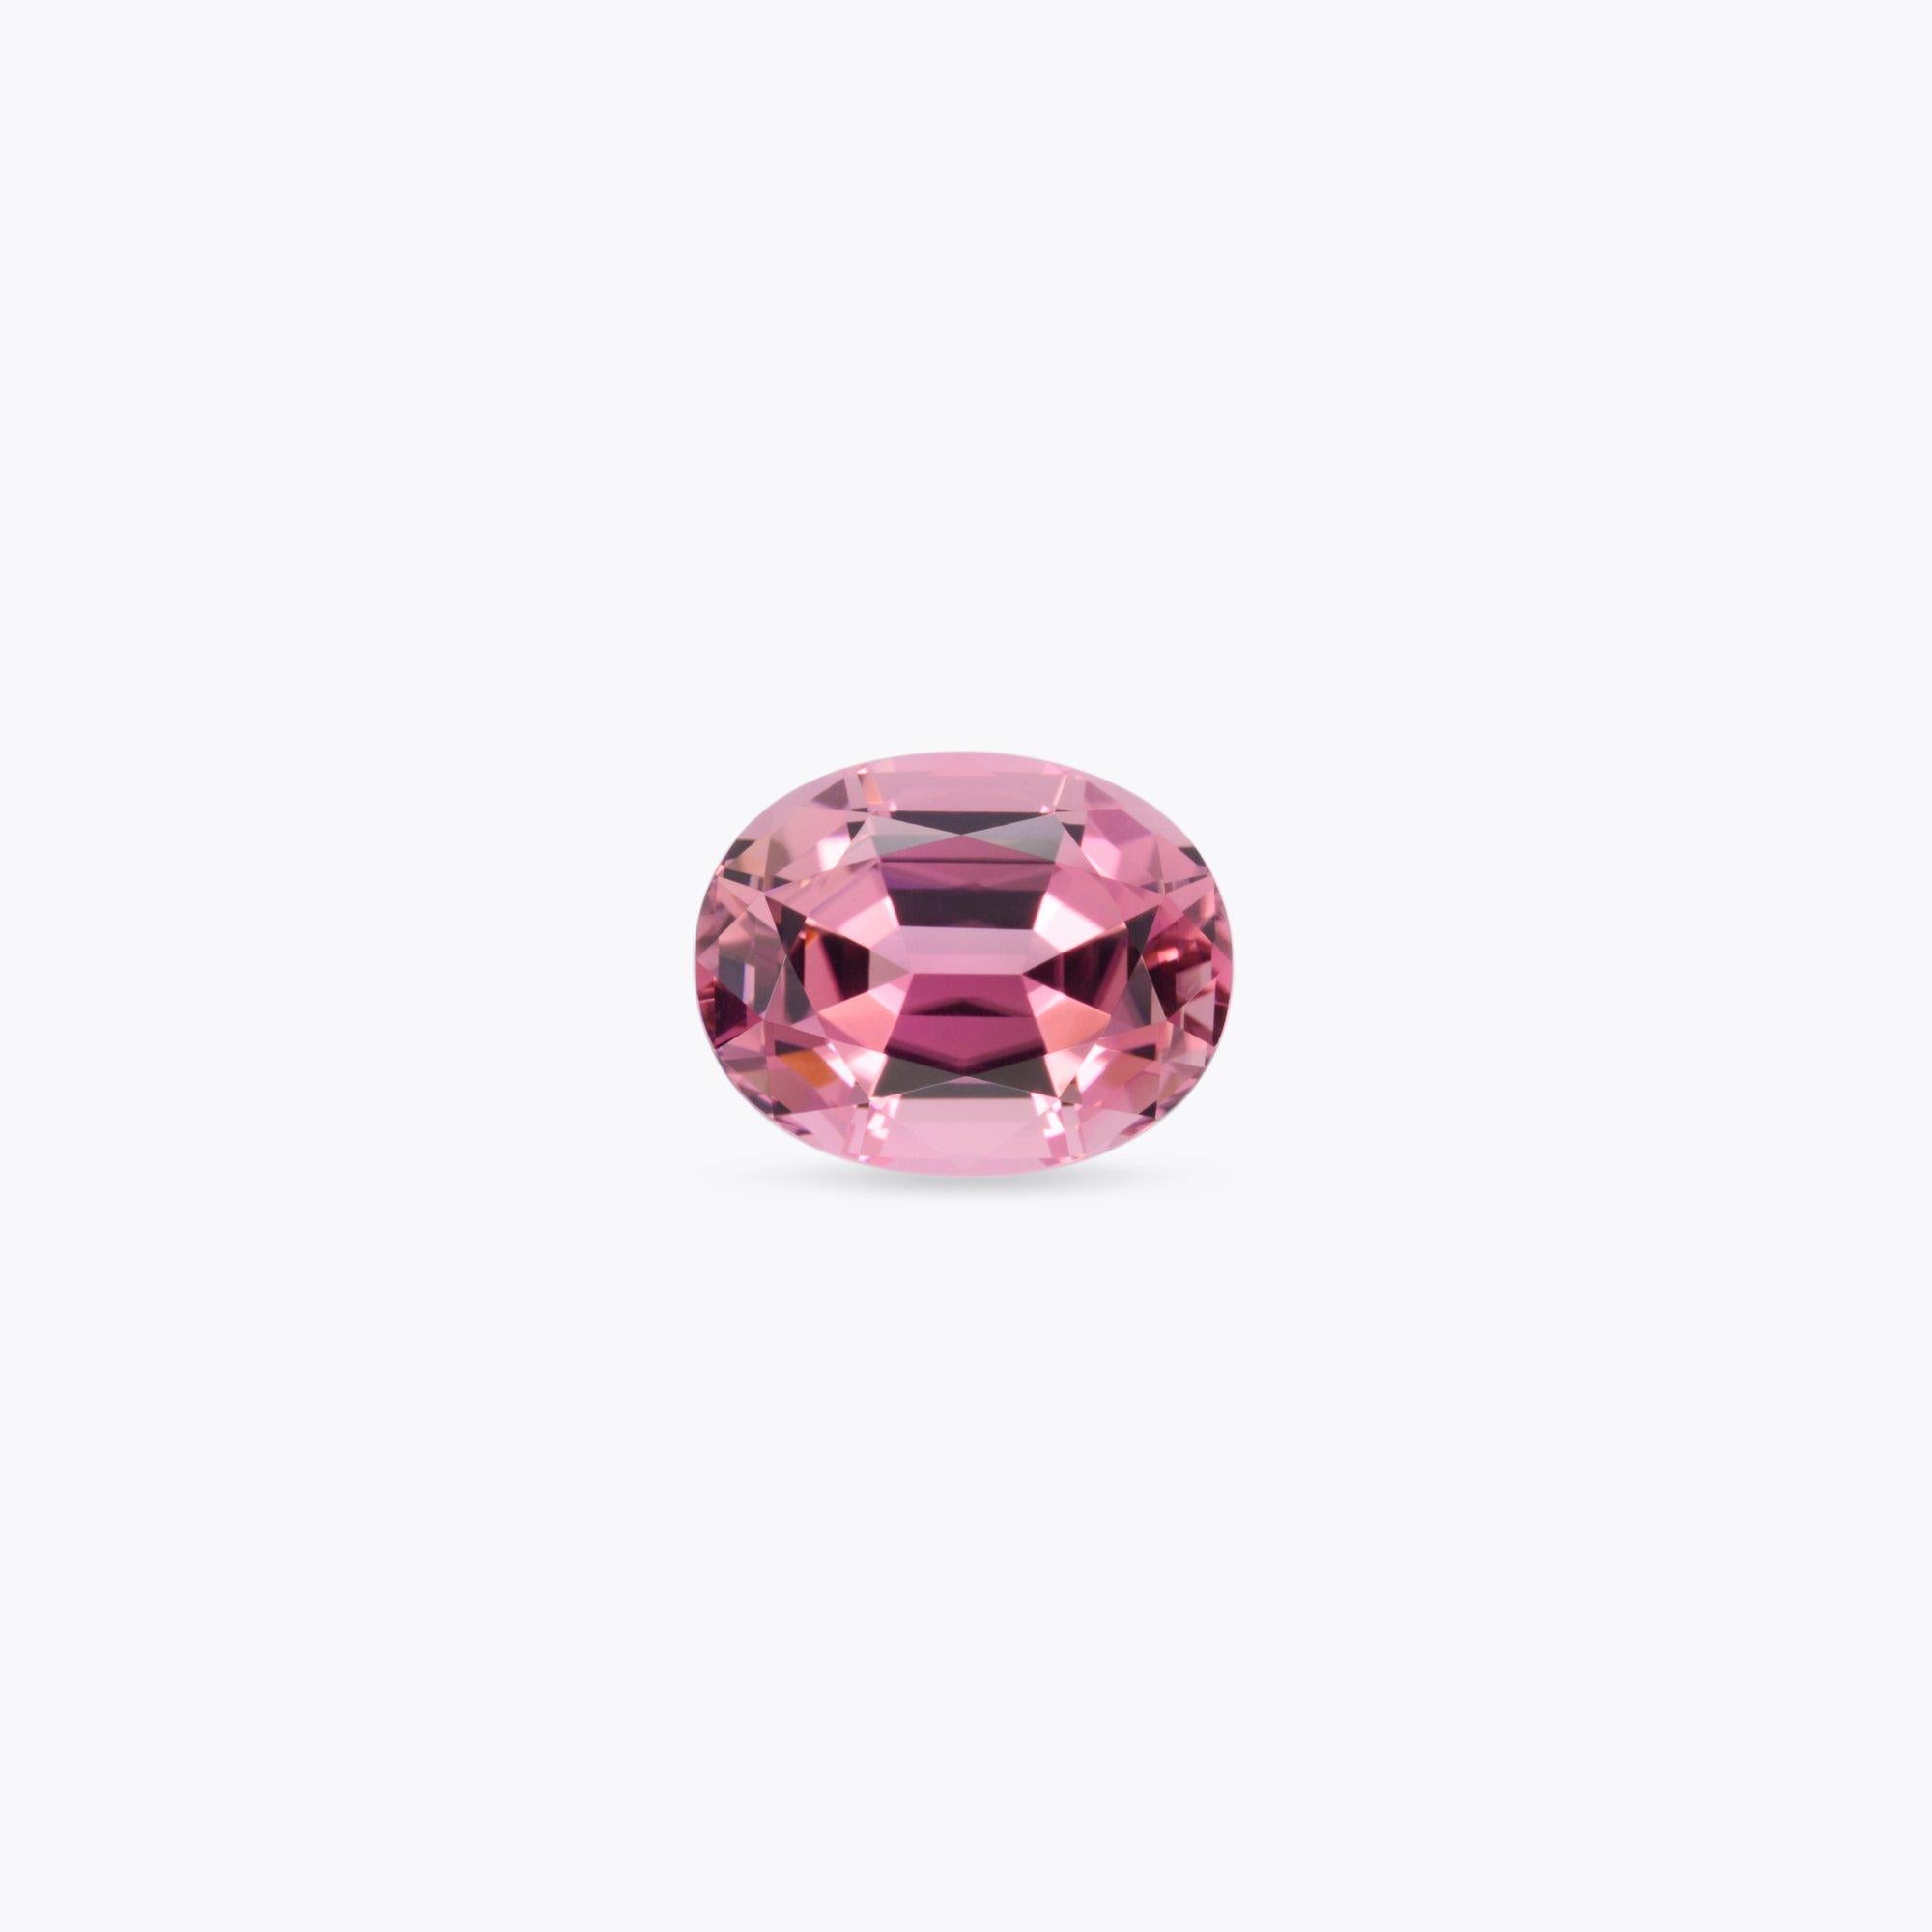 6.95 carat Pink Tourmaline oval gem offered loose to a classy lady.
Returns are accepted and paid by us within 7 days of delivery.
We offer supreme custom jewelry work upon request. Please contact us for more details.
For your convenience we carry